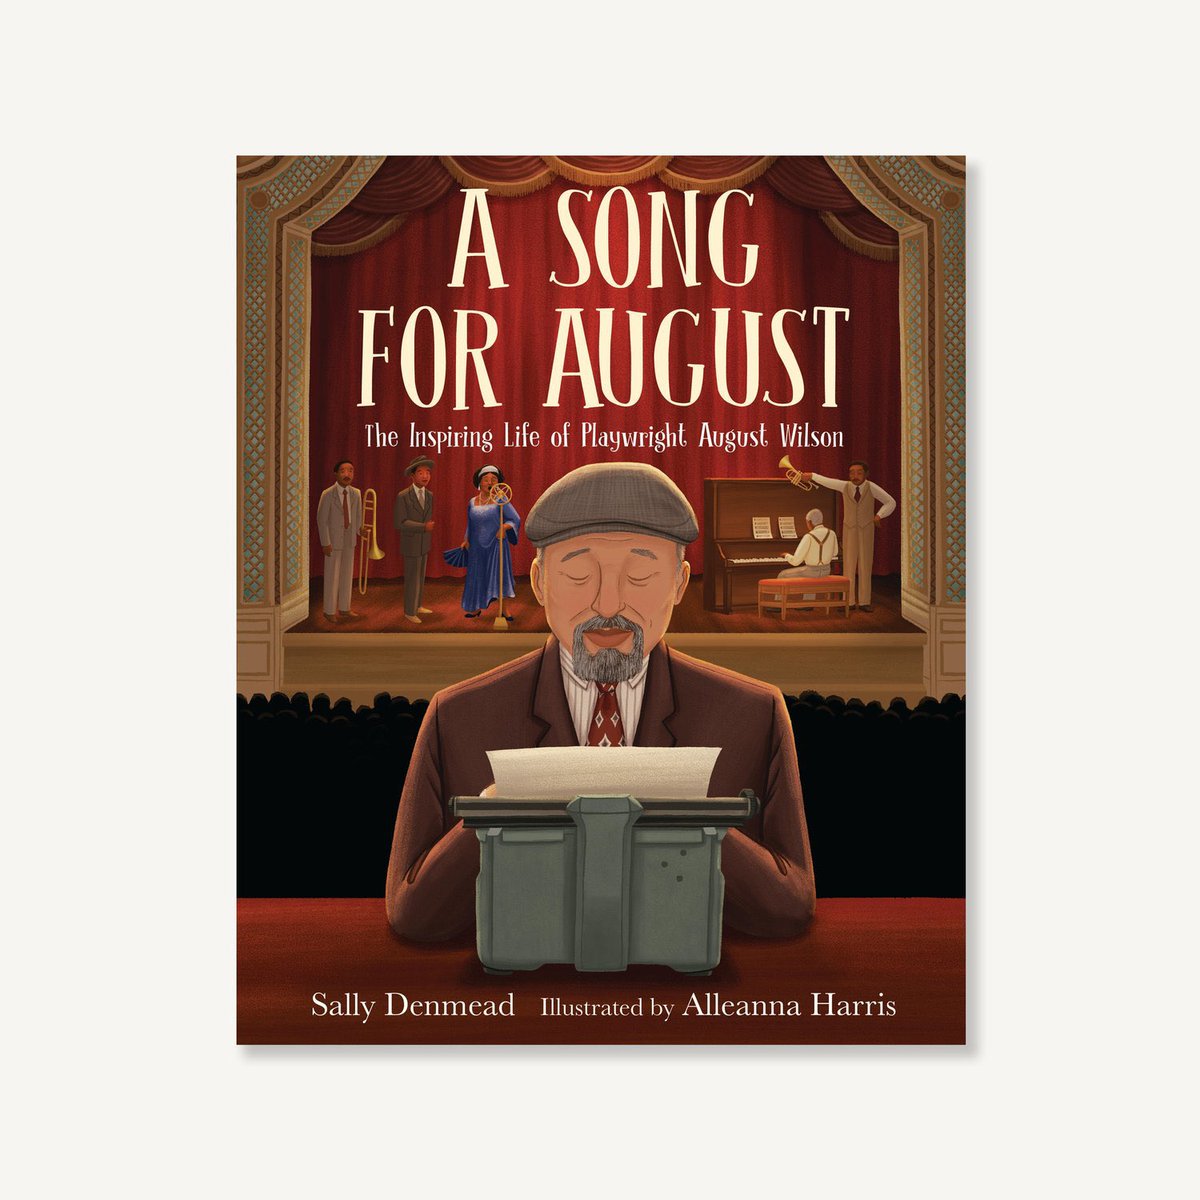 Hey everyone! Just hopping on here to share a ✨new cover✨so I guess this is technically a ✨cover reveal!✨

Say hello to “A SONG FOR AUGUST” by Sally Denmead and illustrated by me. “An ode to one of America's foremost Black playwrights, August Wilson…